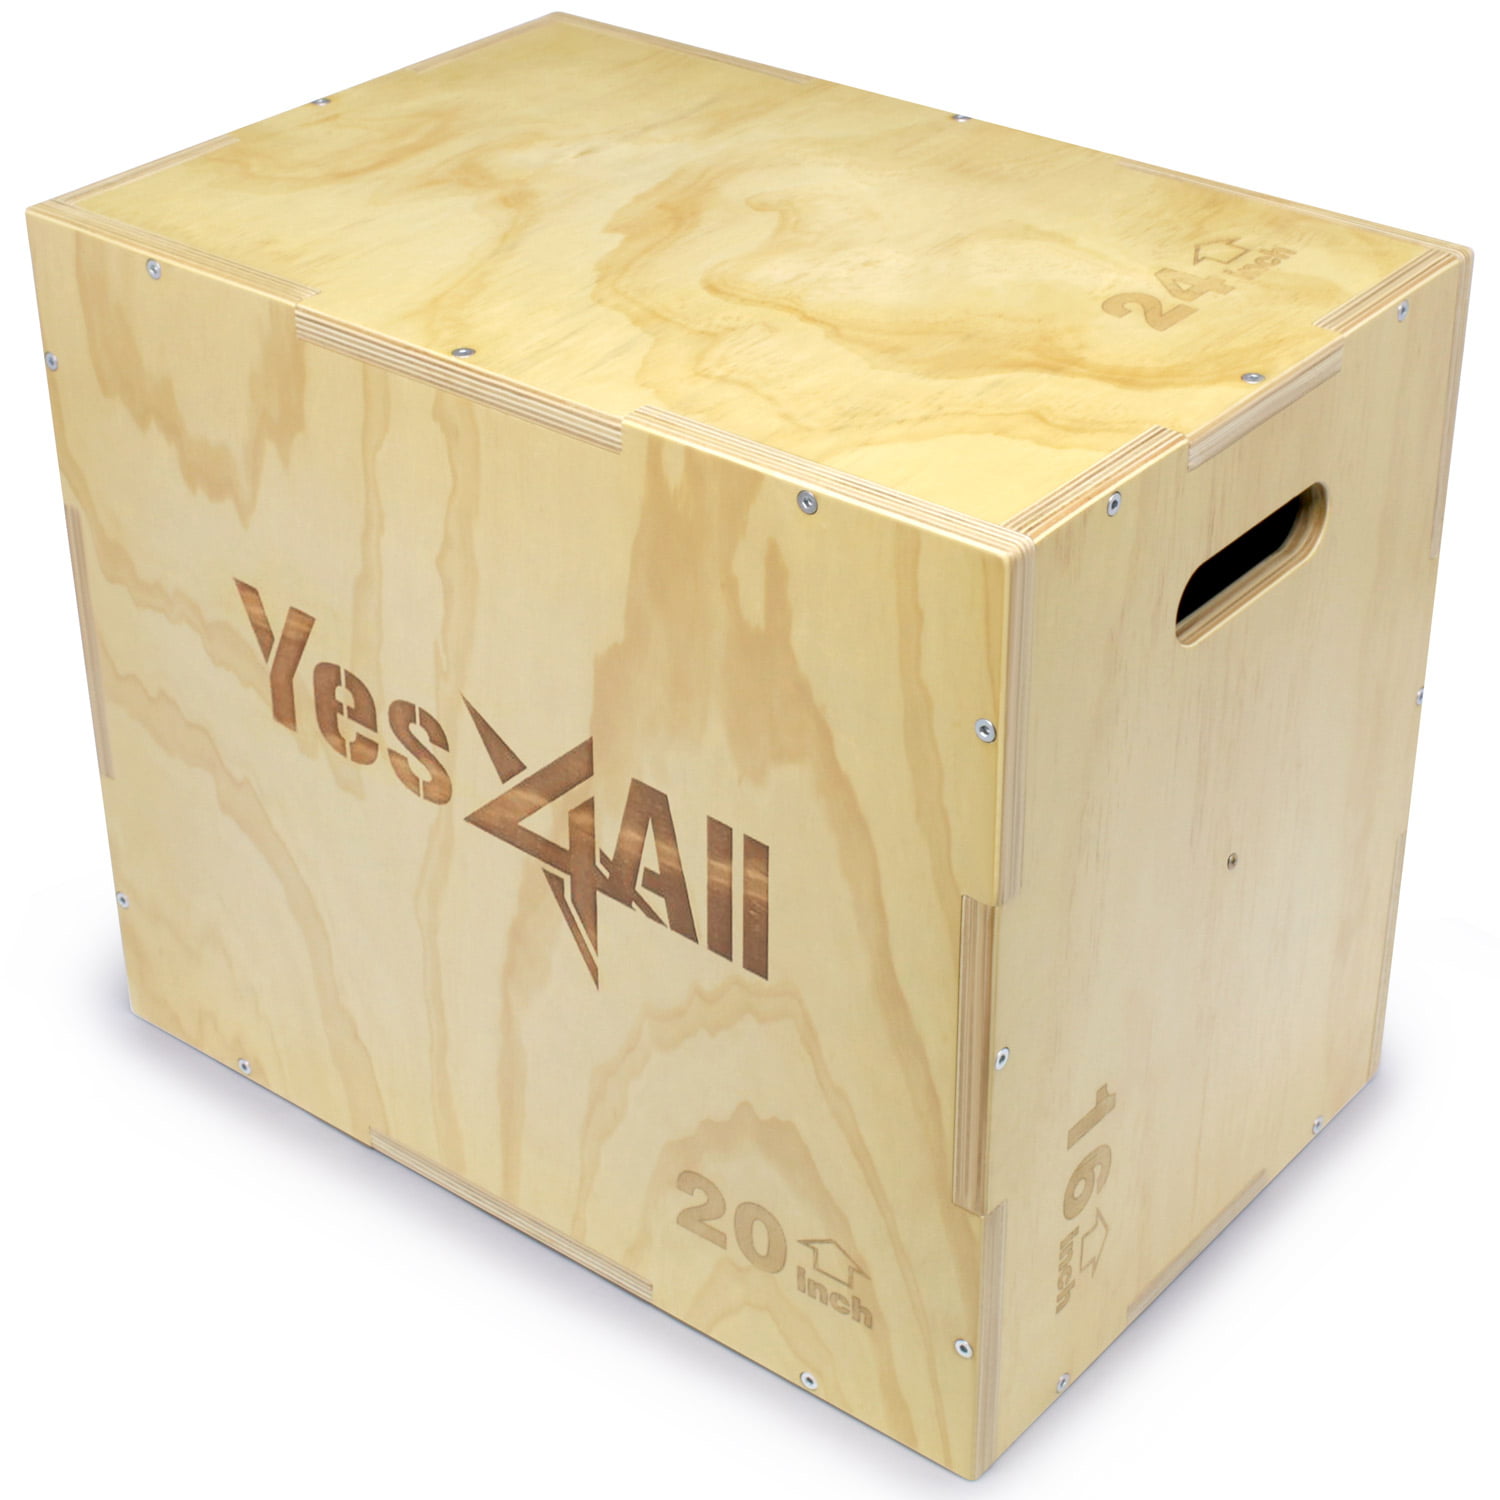 Crossfit Workout Perfect For Jumping Exercise Available In 5 Sizes 4, 6, 8, 12, 16 Yes4All Stackable Wood Plyo Box/Plyometric Box 